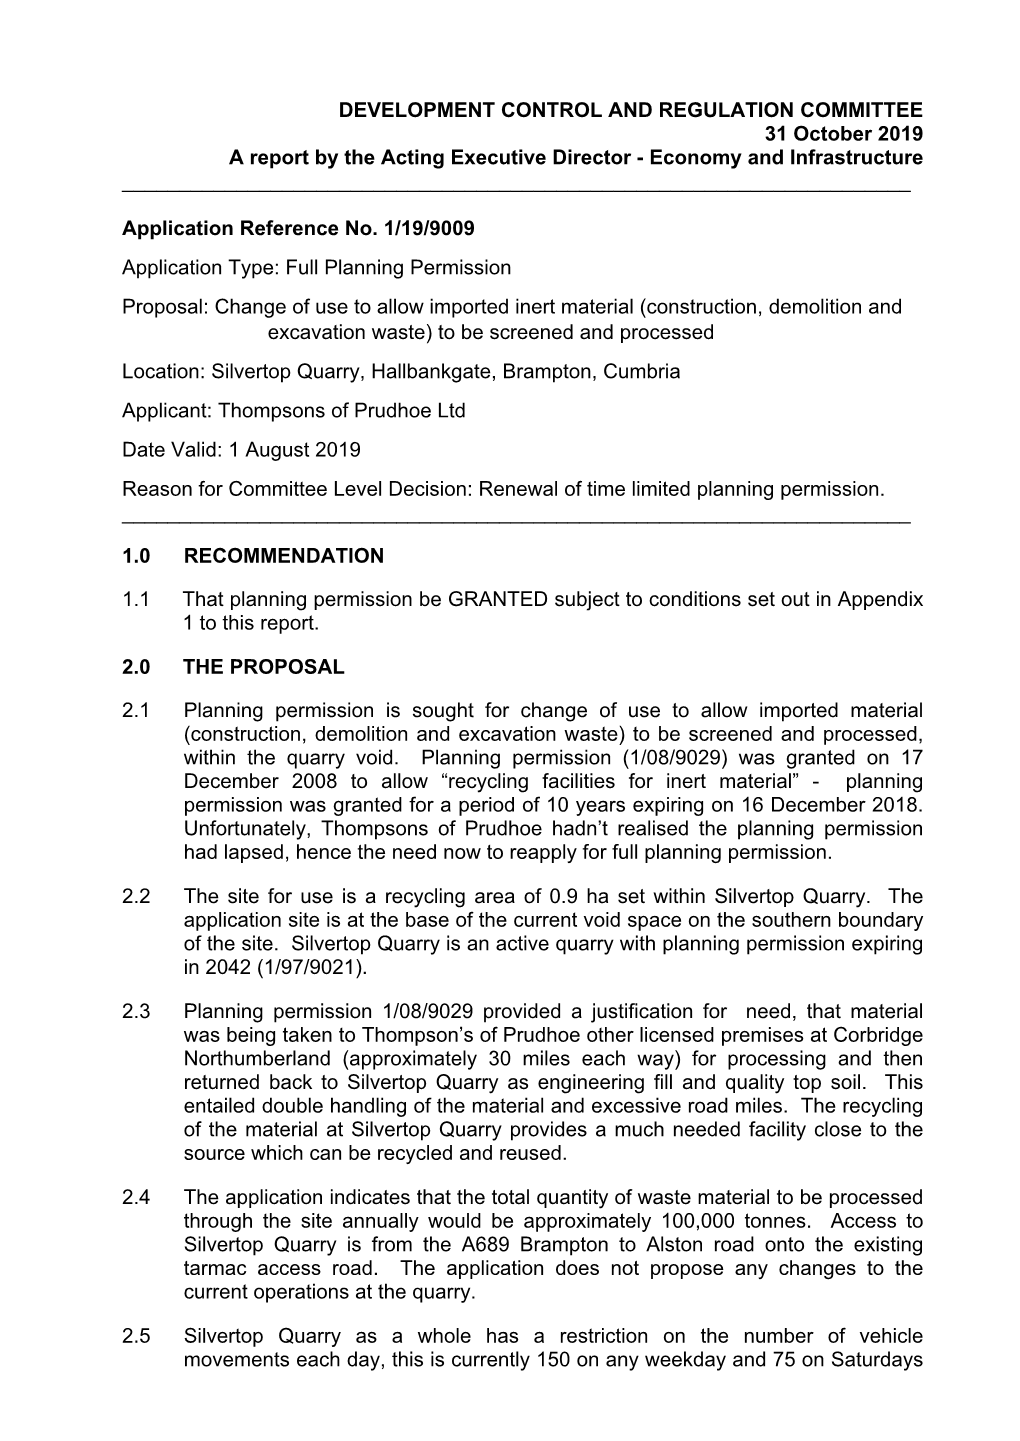 Application Reference No. 1/19/9009. Proposal